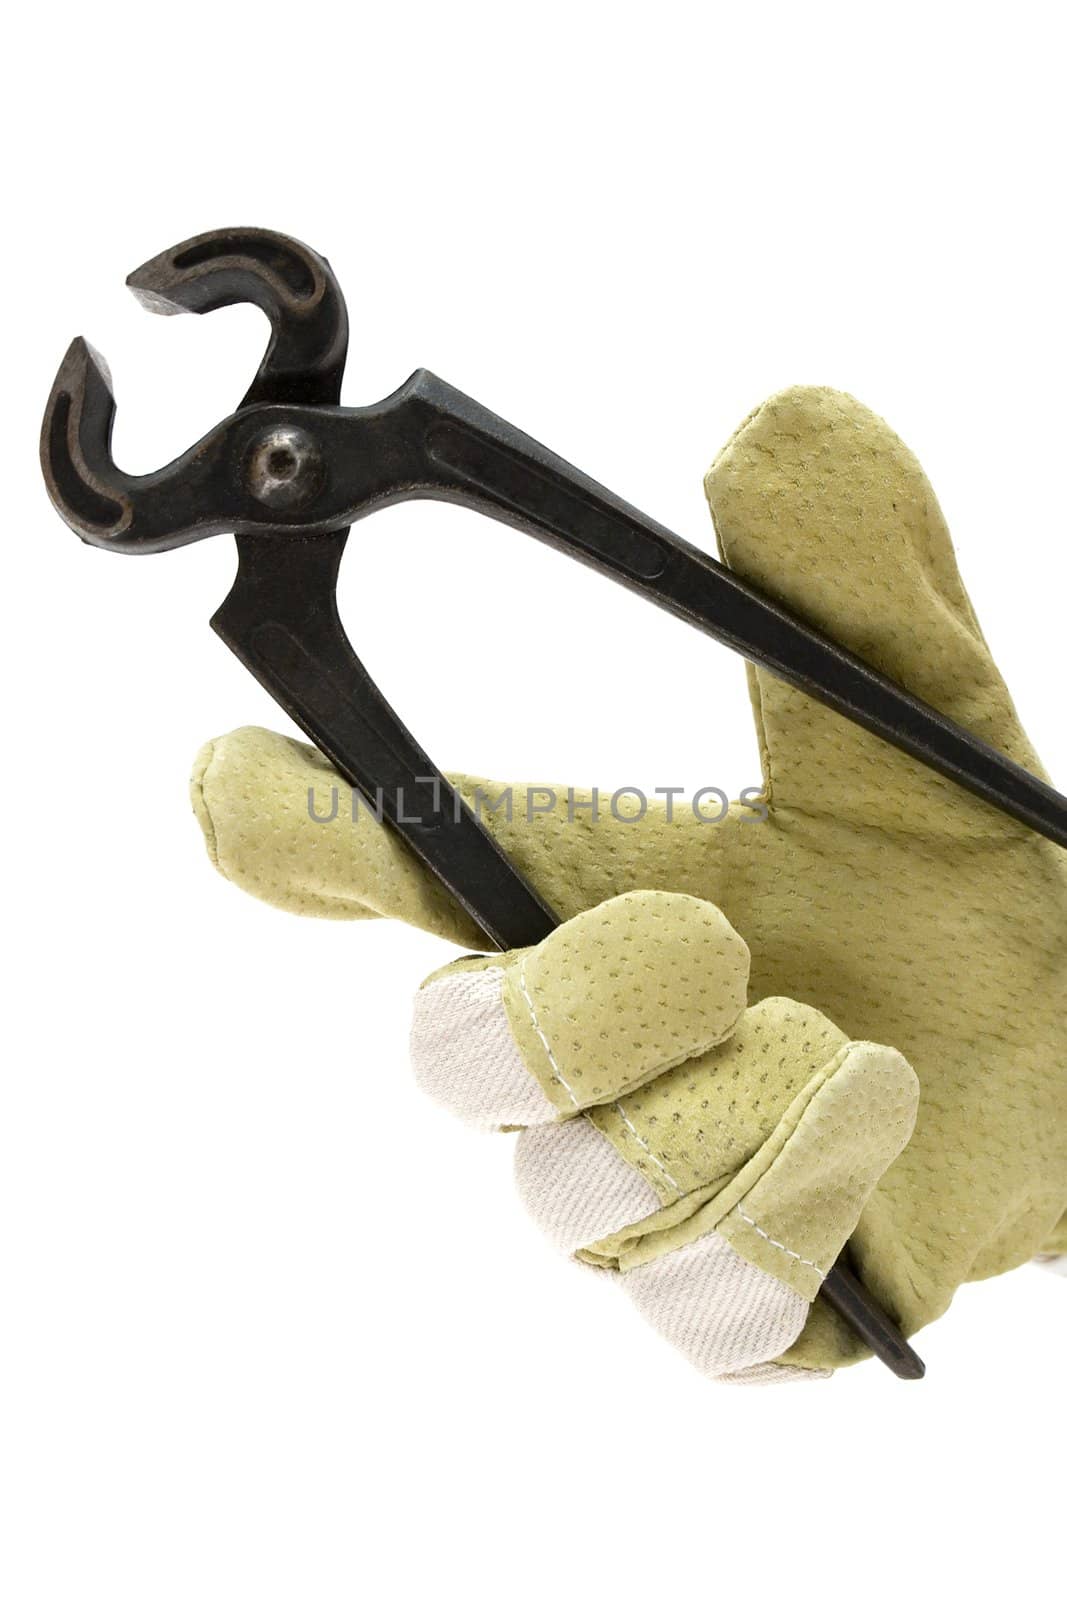 Cutting Pliers by winterling